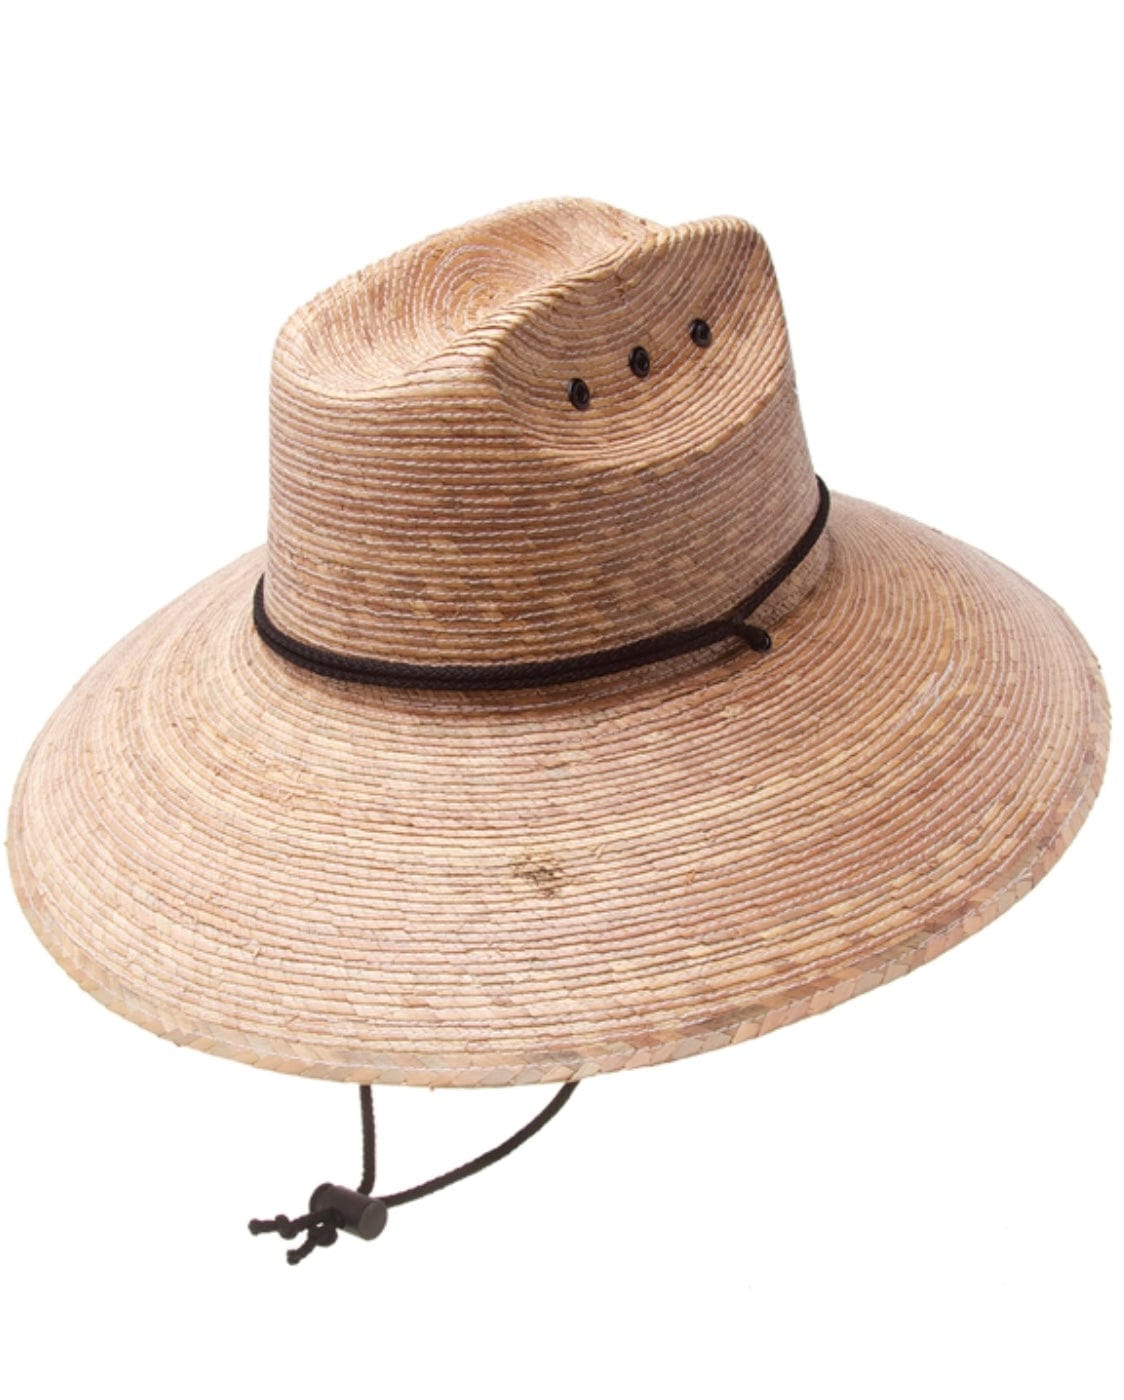 Island Girl Hats Island Girl Hats Palm Leaf Routine equestrian team apparel online tack store mobile tack store custom farm apparel custom show stable clothing equestrian lifestyle horse show clothing riding clothes horses equestrian tack store